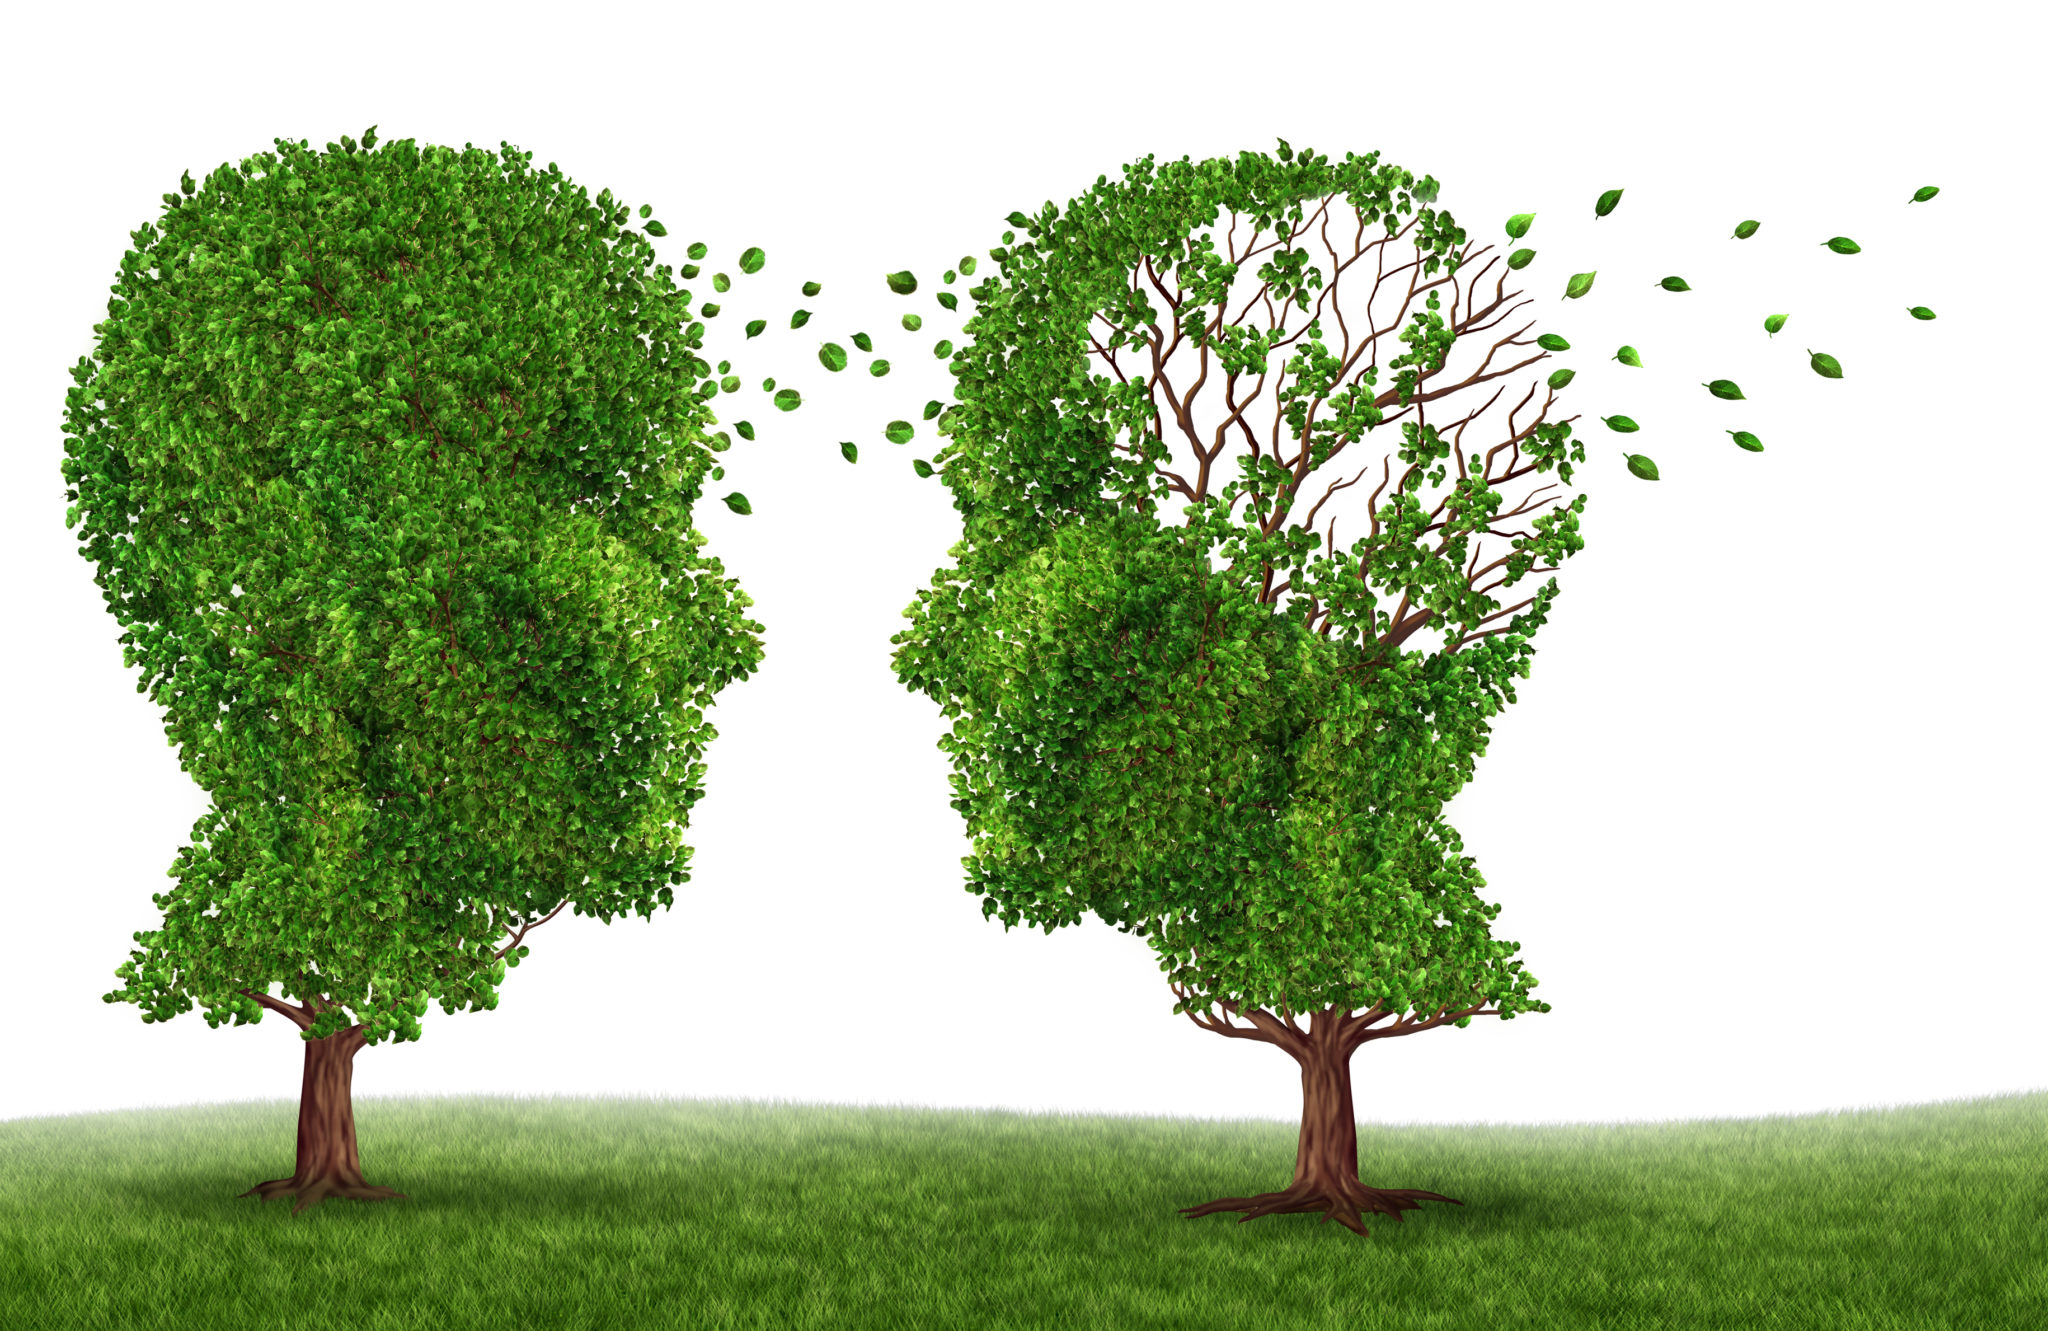 Living with a dementia patient and alzheimers disease with two trees in the shape of a human head and brain as a symbol of the stress and effects on loved ones and caregivers by the loss of memory and cognitive intelligence function.